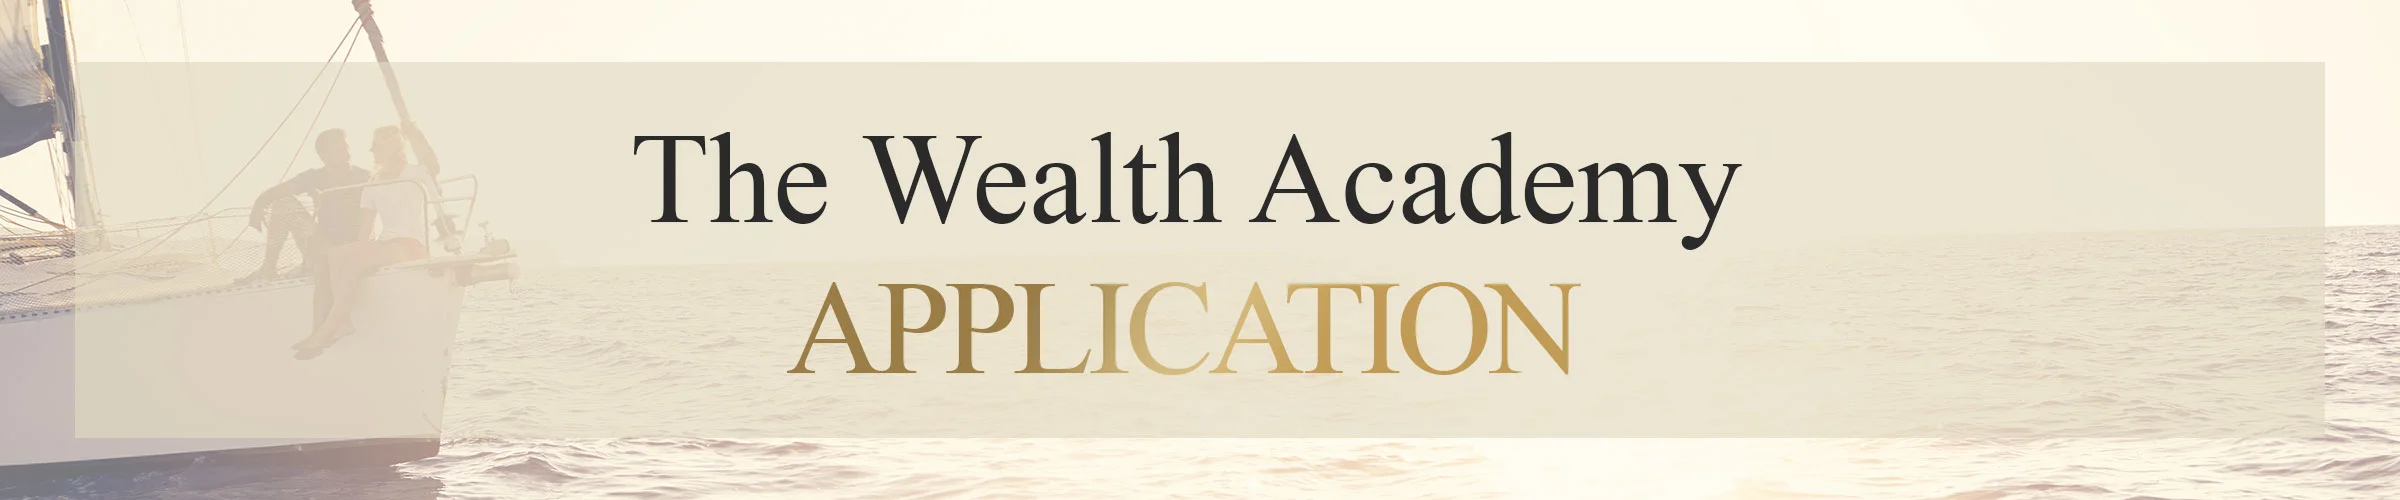 The Wealth Academy Application